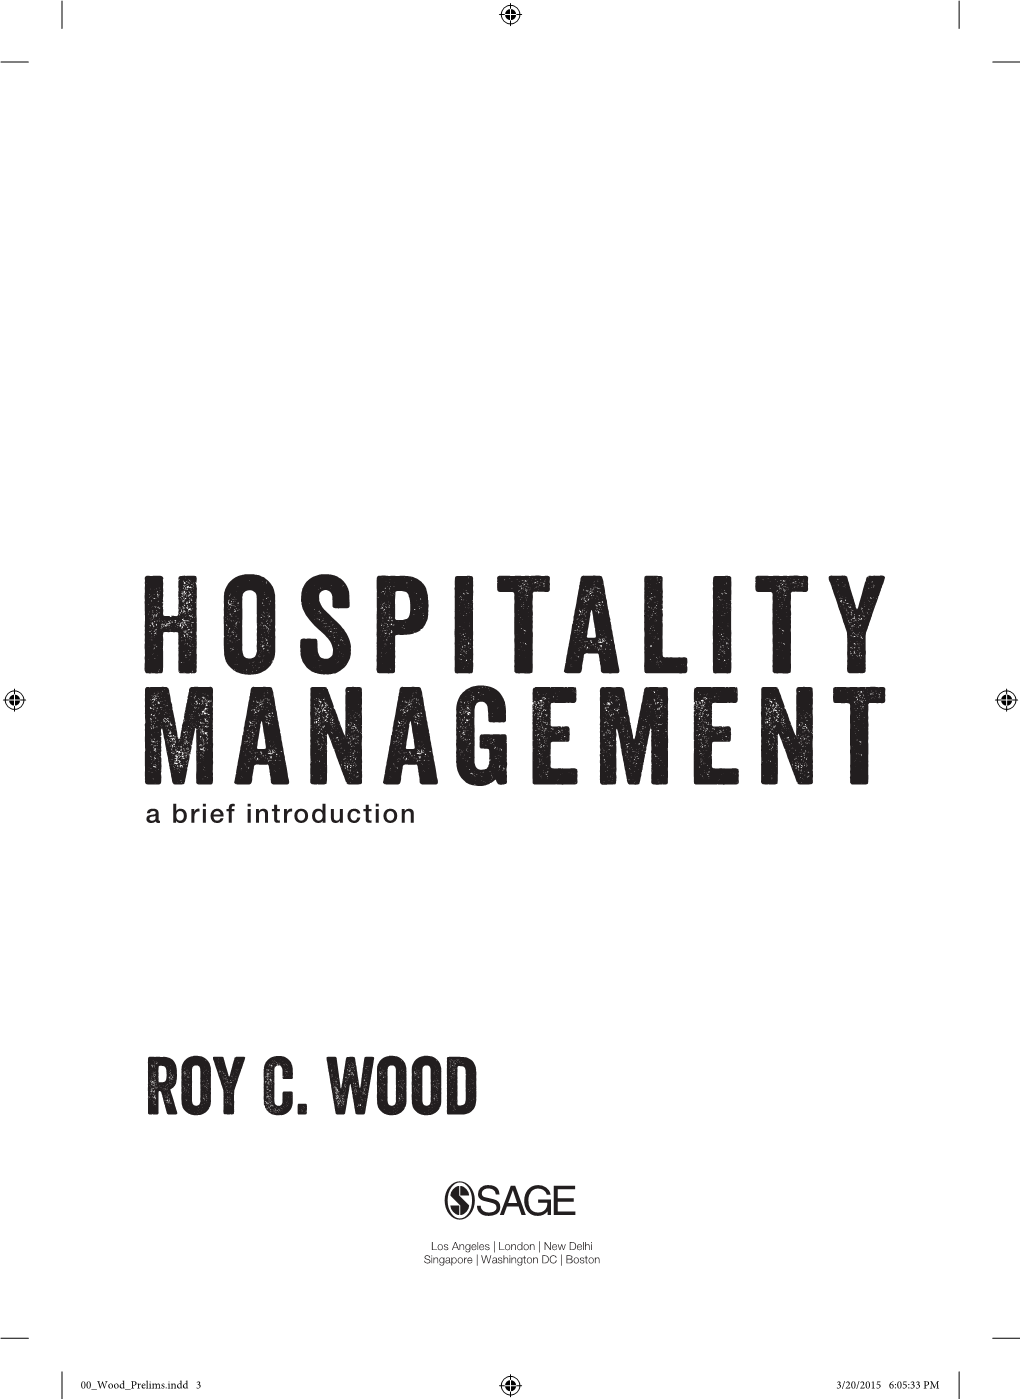 The Role of Management in Hospitality